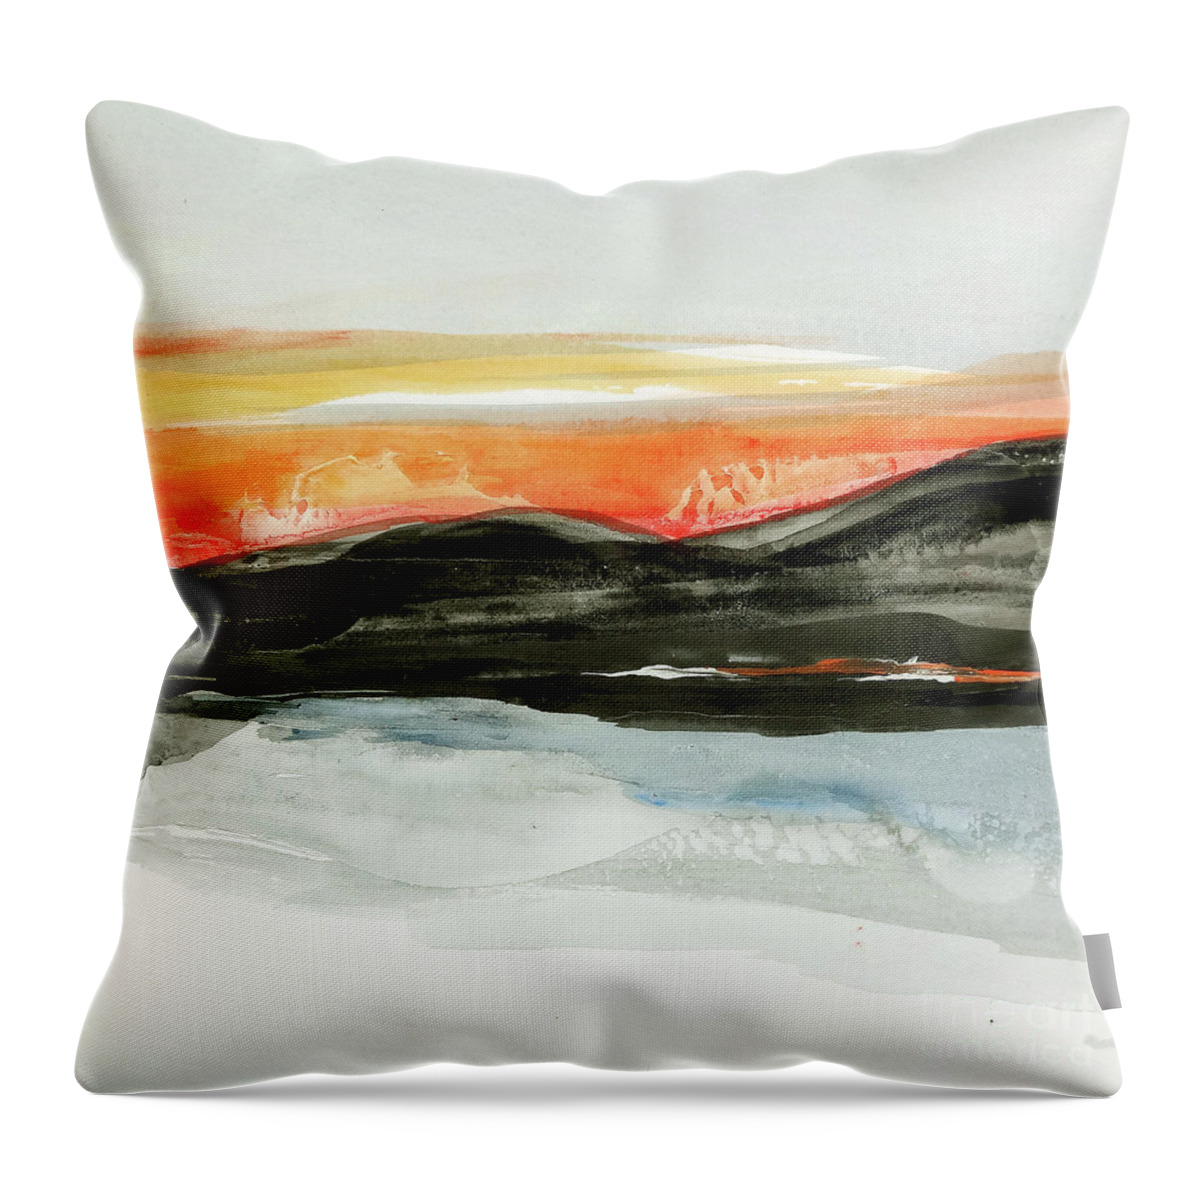 Original Watercolors Throw Pillow featuring the painting Taos Reflection by Chris Paschke